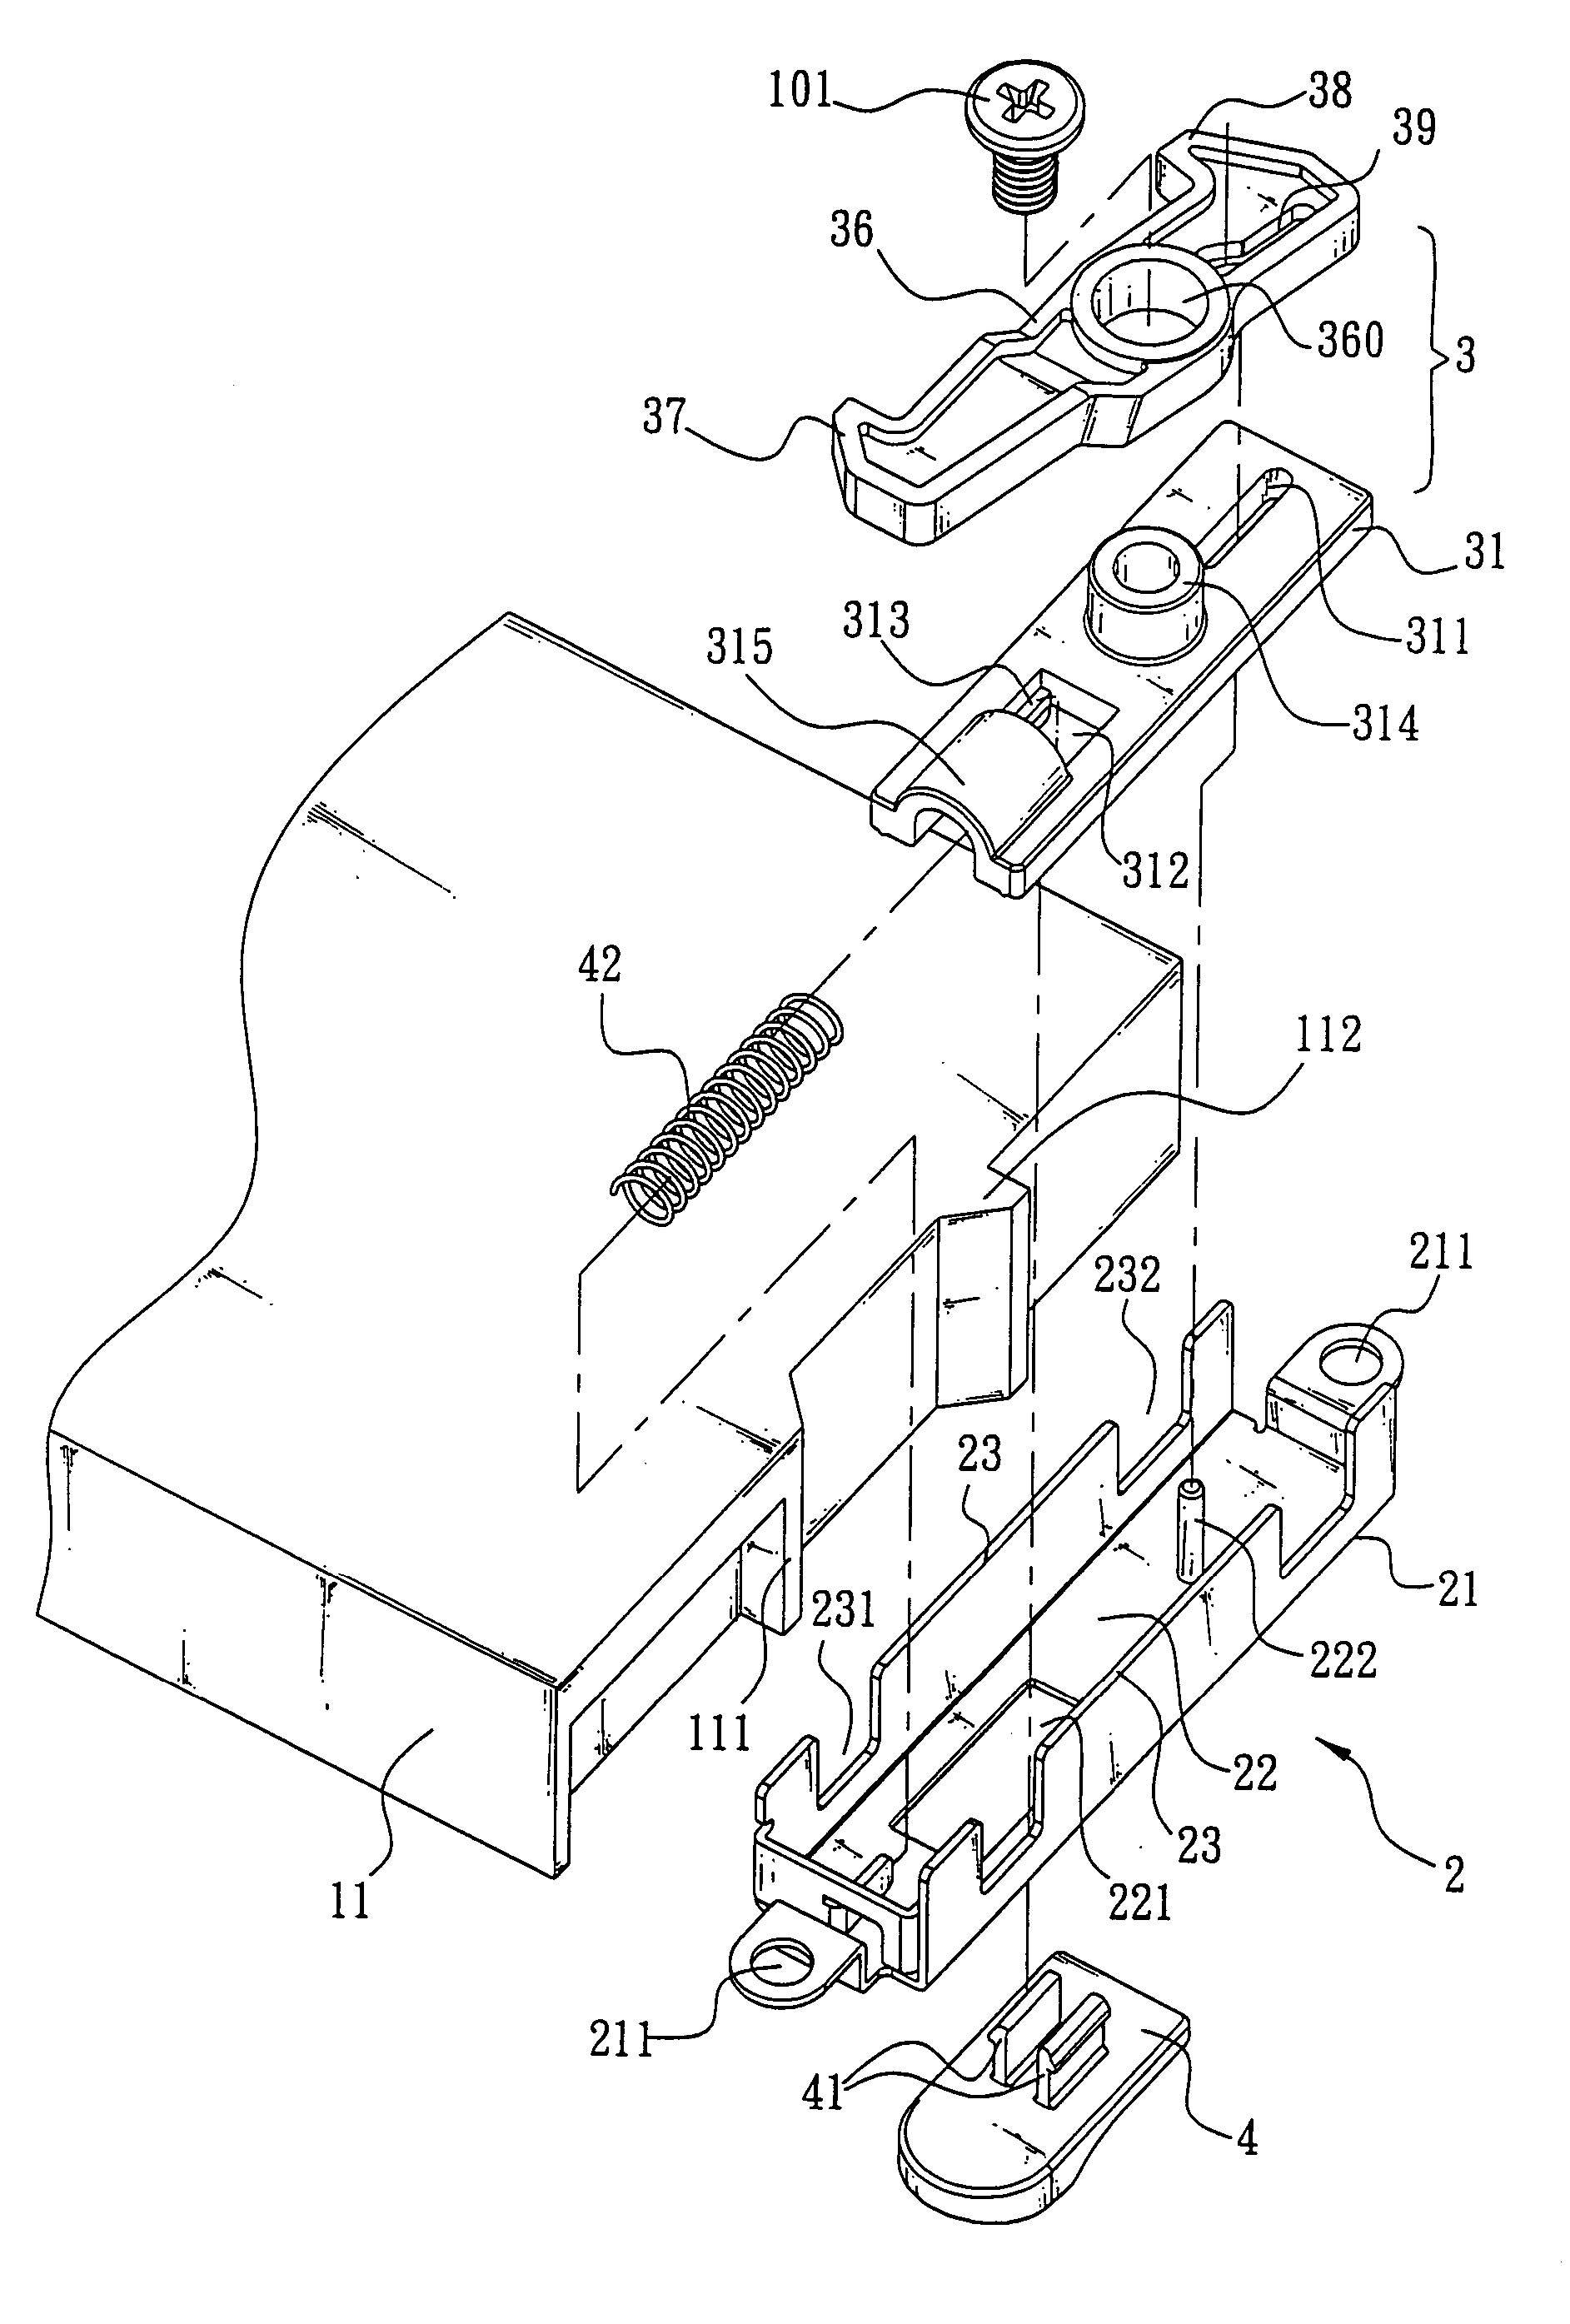 Mechanism for fastening an electronic device in computer by snapping